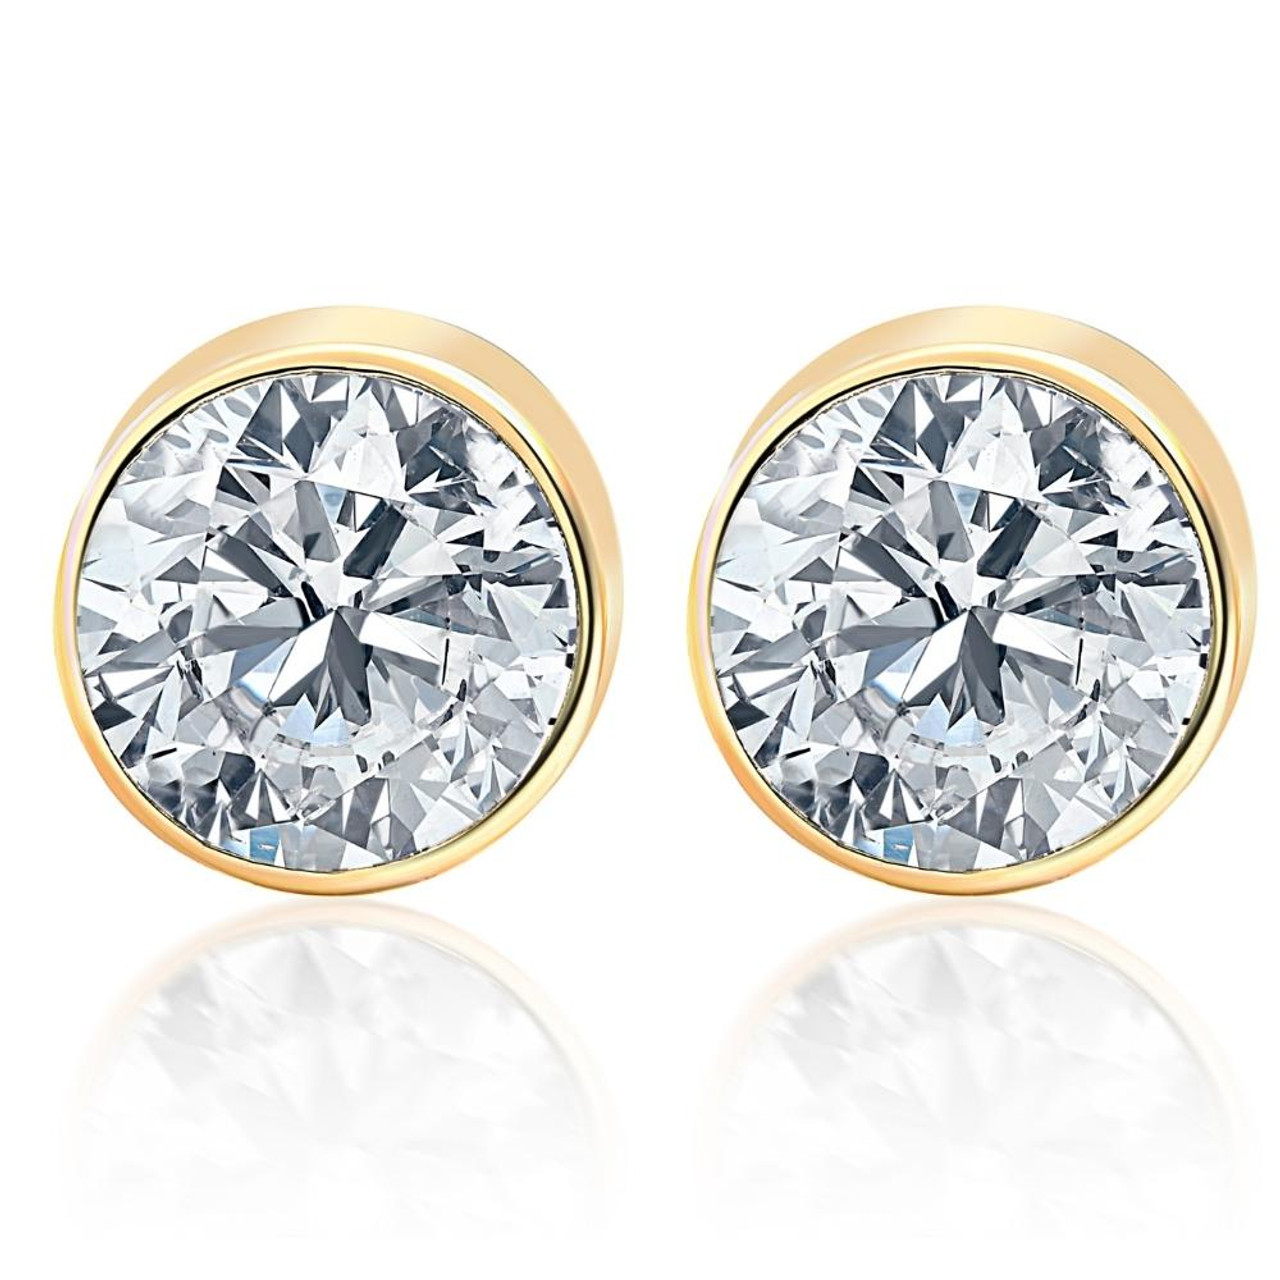 2.00Ct Round Cut Simulated Diamond LV Stud Earrings in 14K Yellow